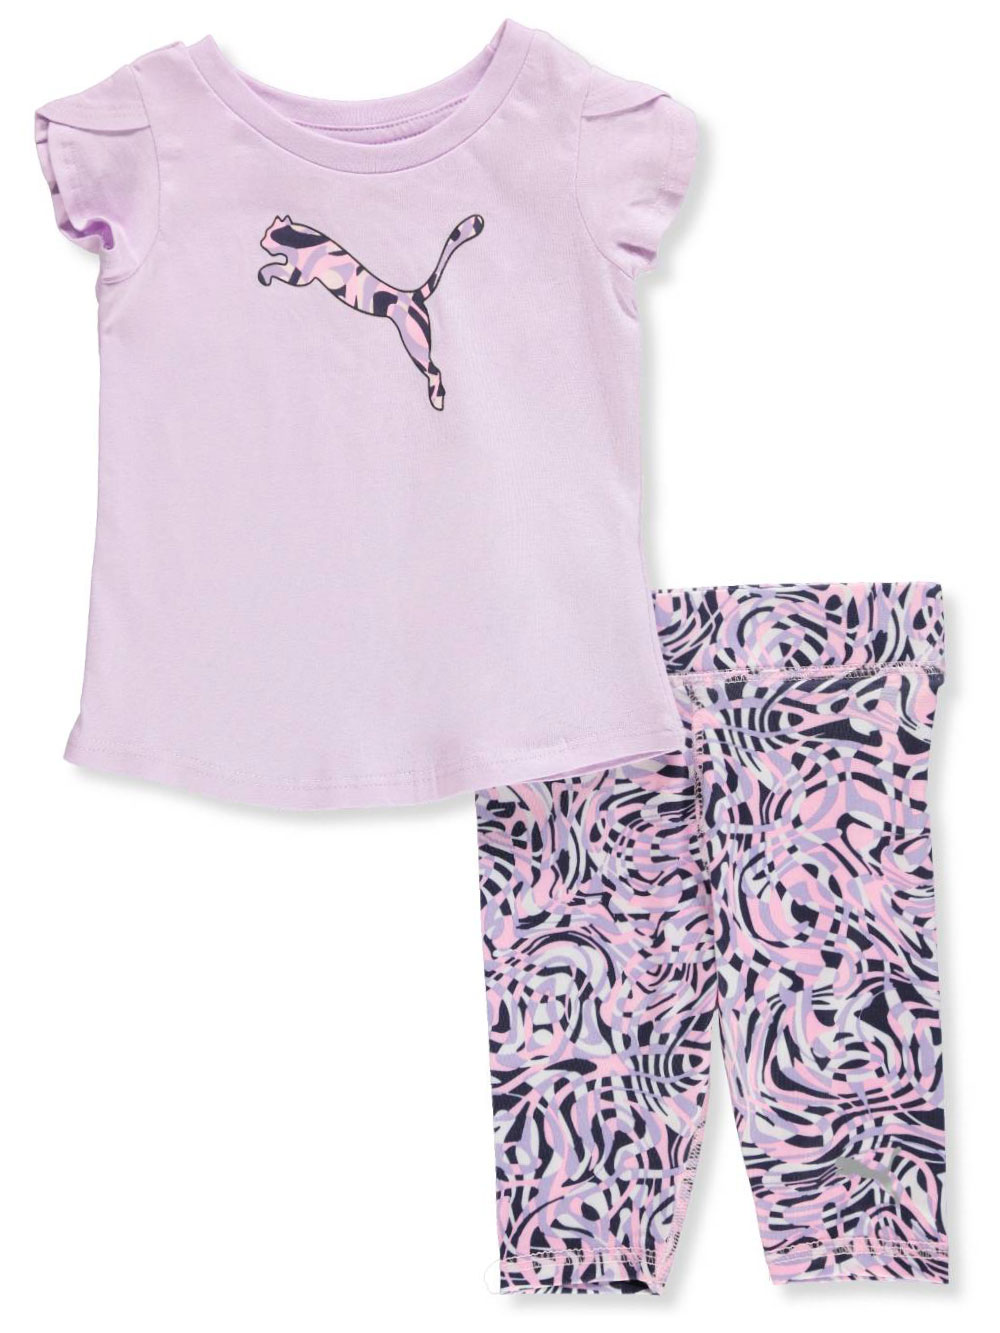 baby girl puma outfits